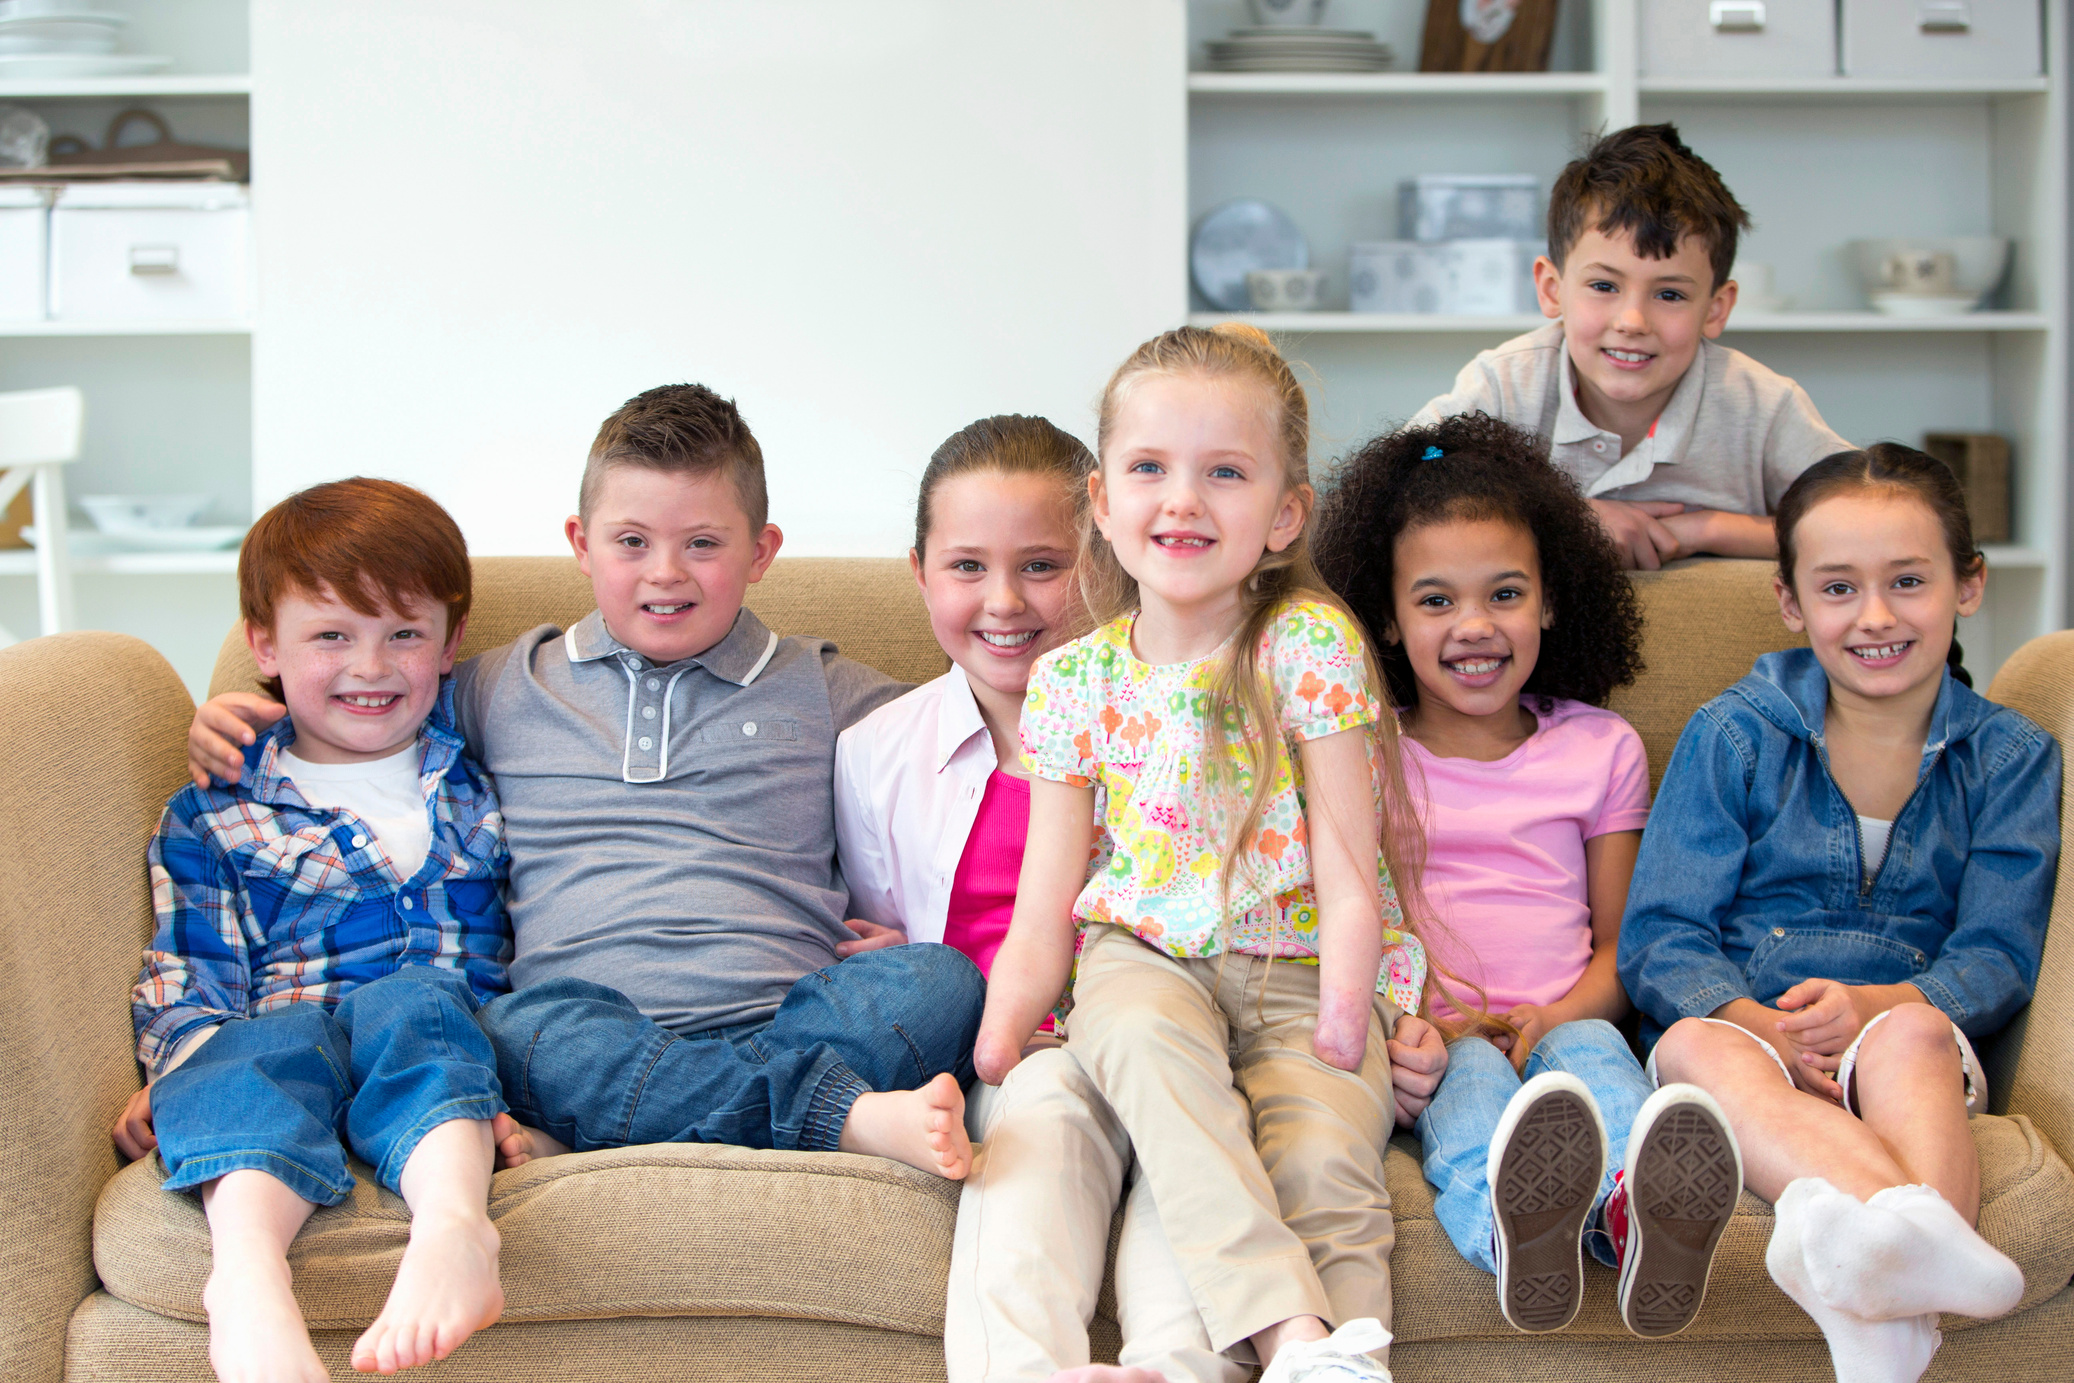 Portrait Of Disabled Children Sitting On Sofa With Friends